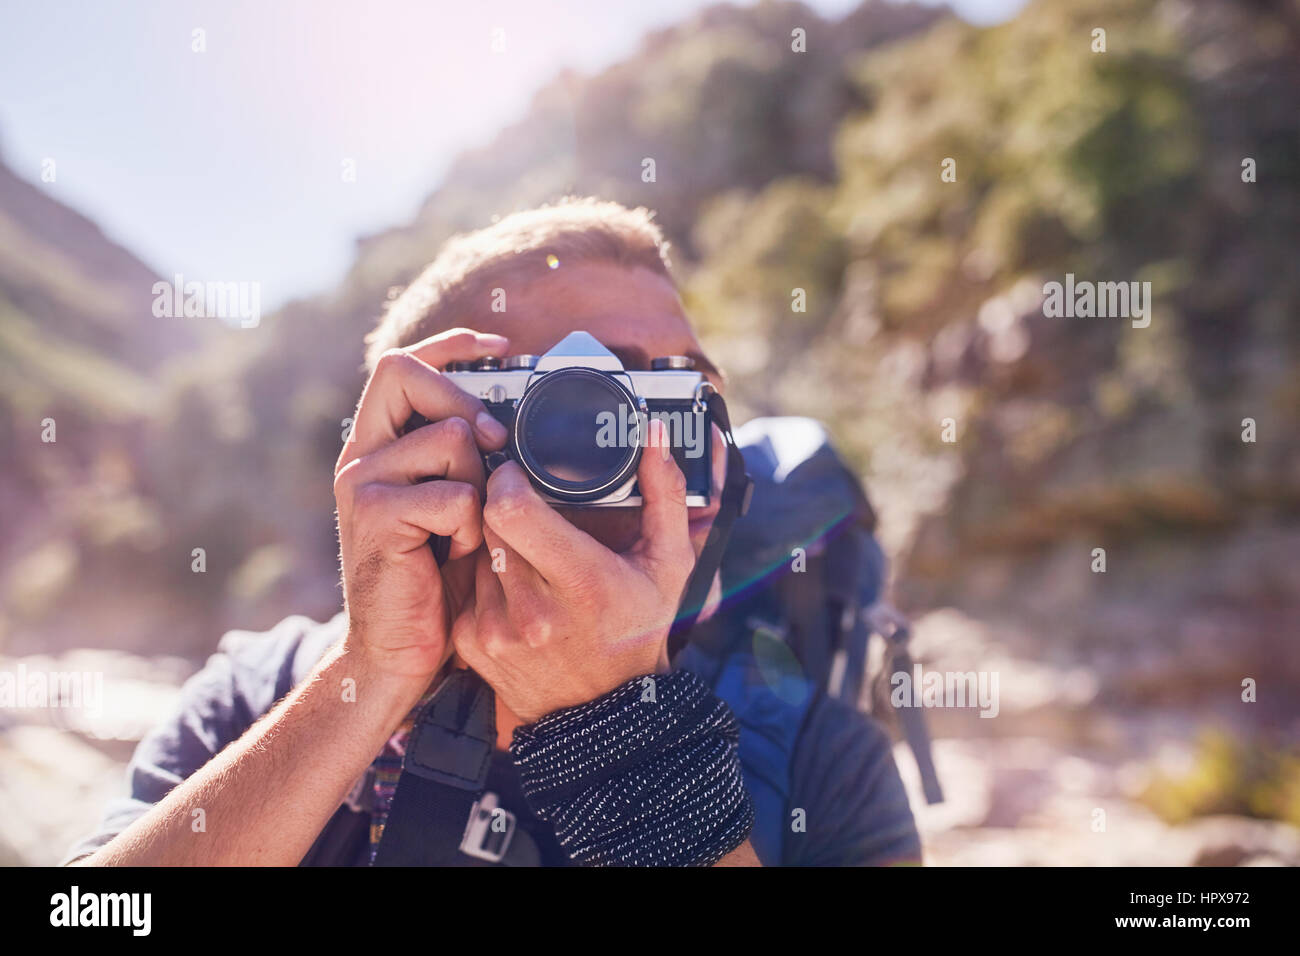 Young man hiking, photographing with camera Stock Photo